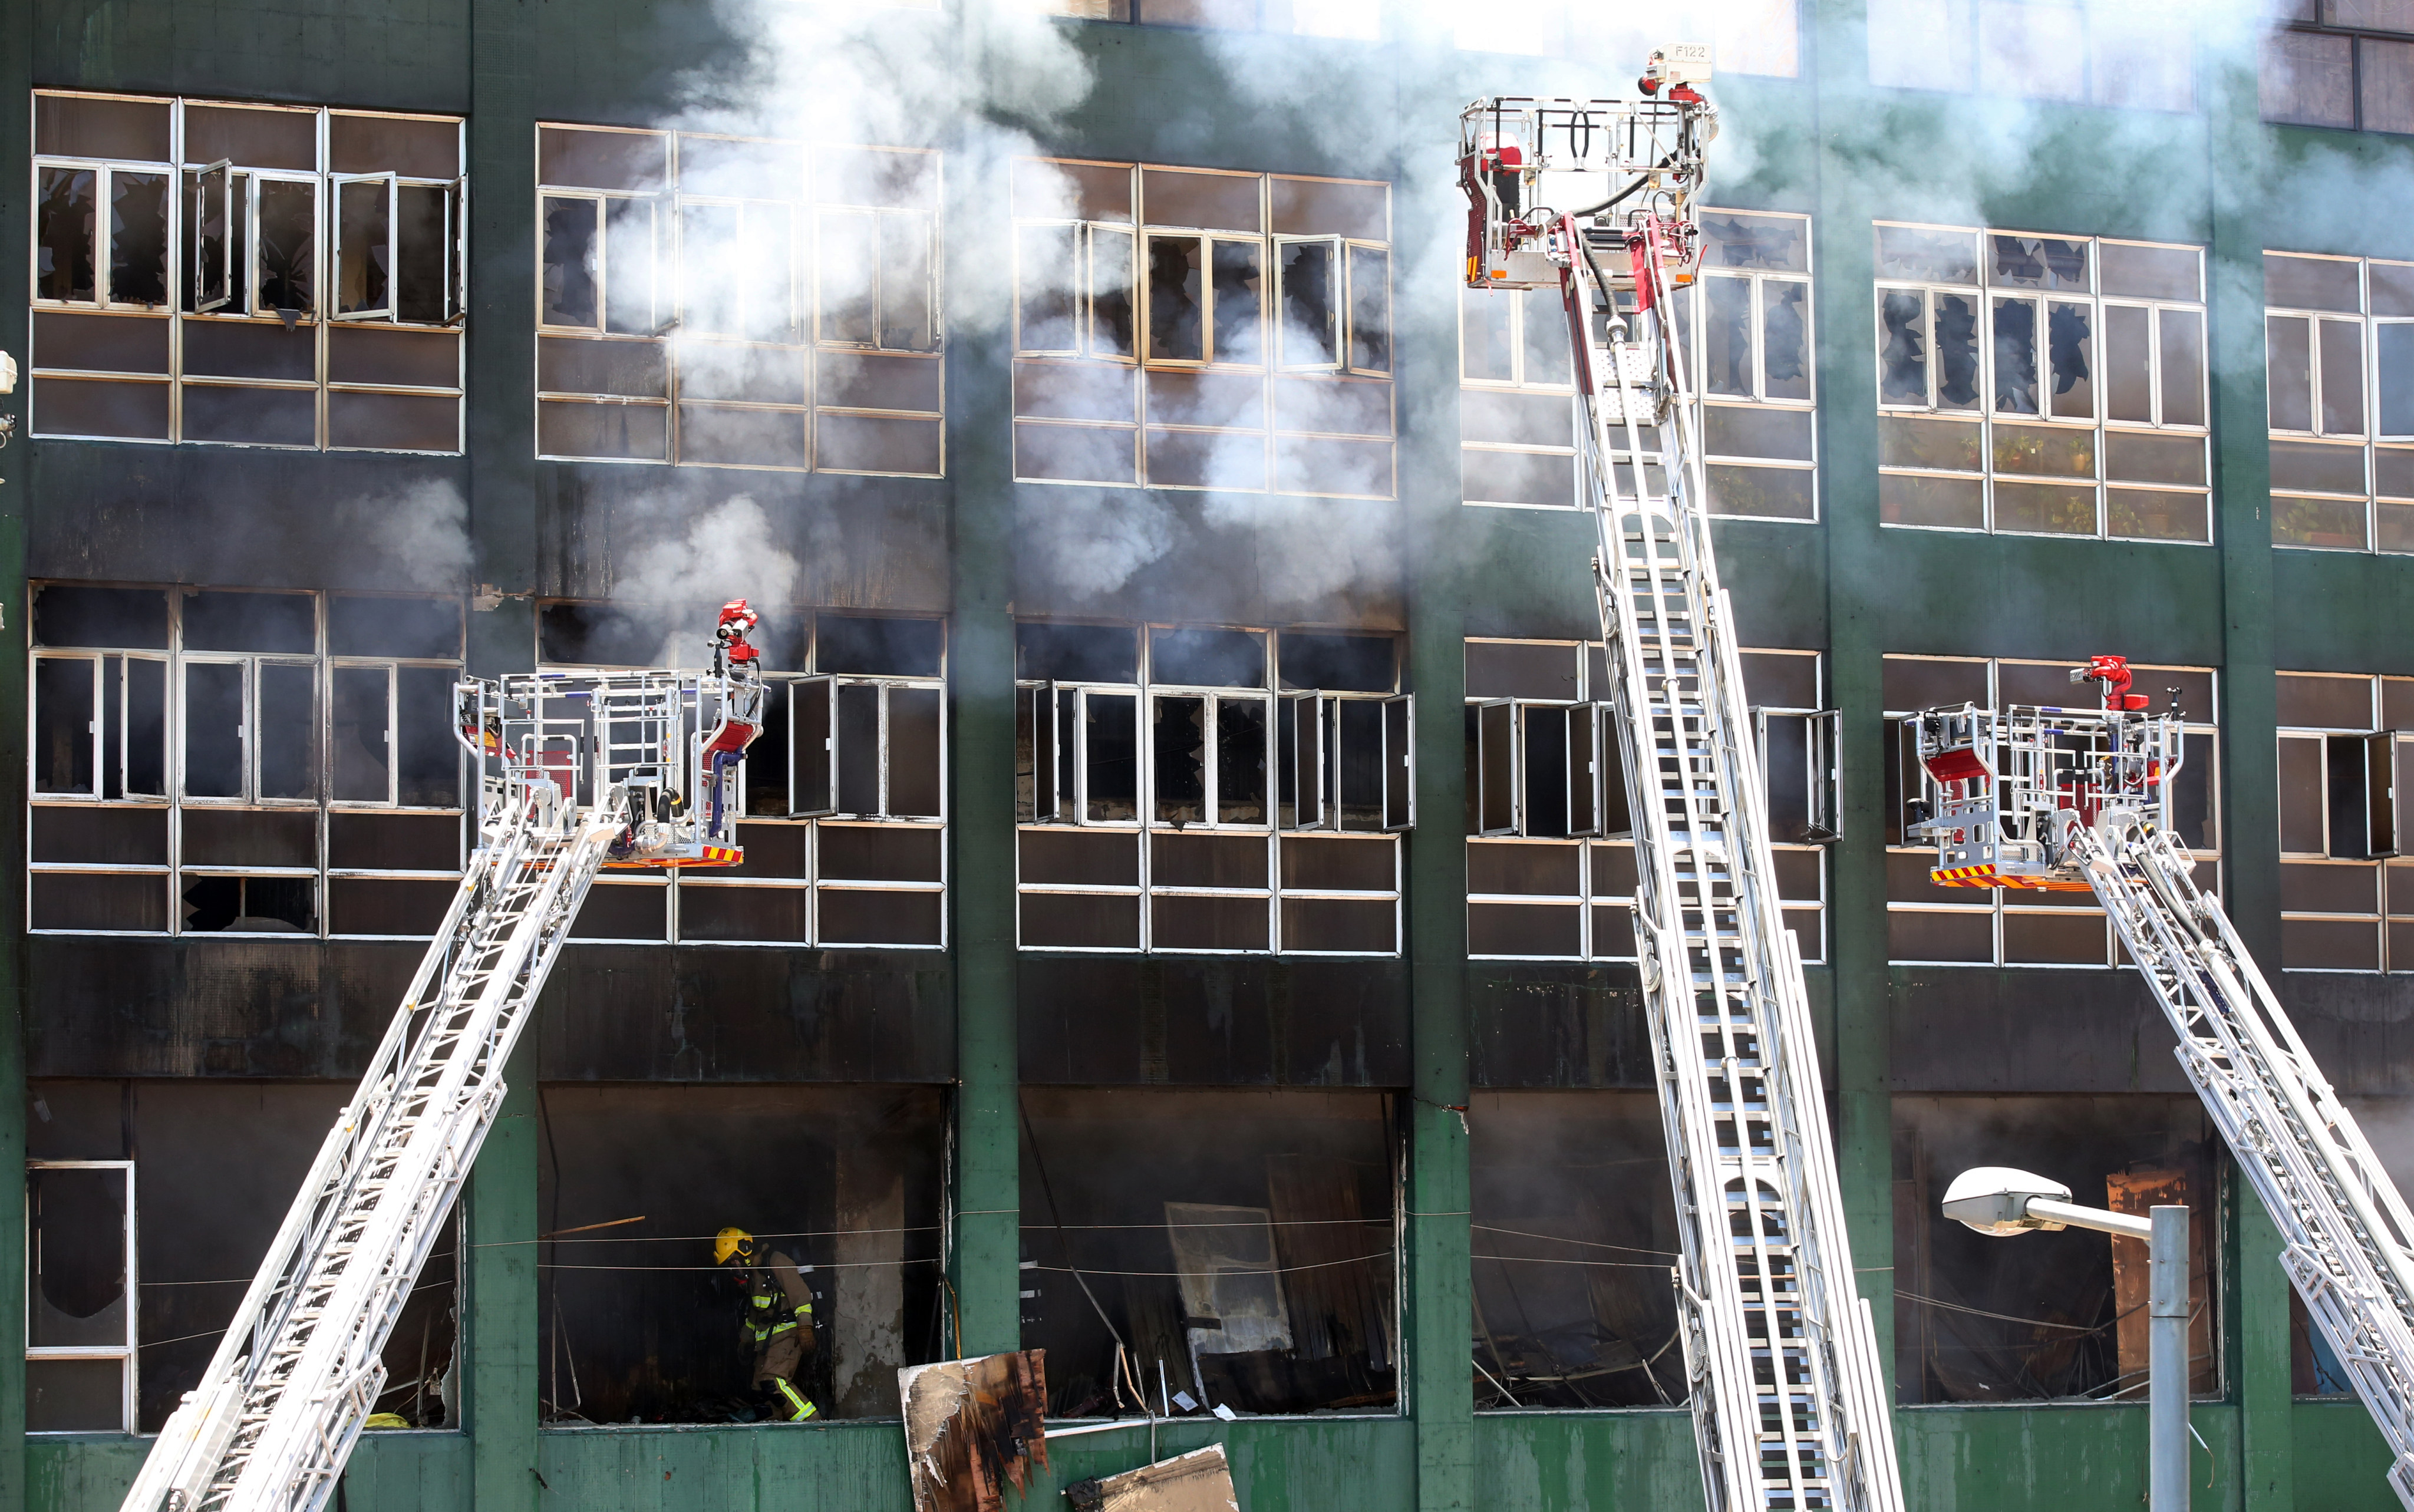 The fourth-alarm fire in Ngau Tau Kok in 2016 was the longest-running blaze at an industrial premises in Hong Kong history, having burned for 108 hours and 16 minutes. Photo: Edward Wong